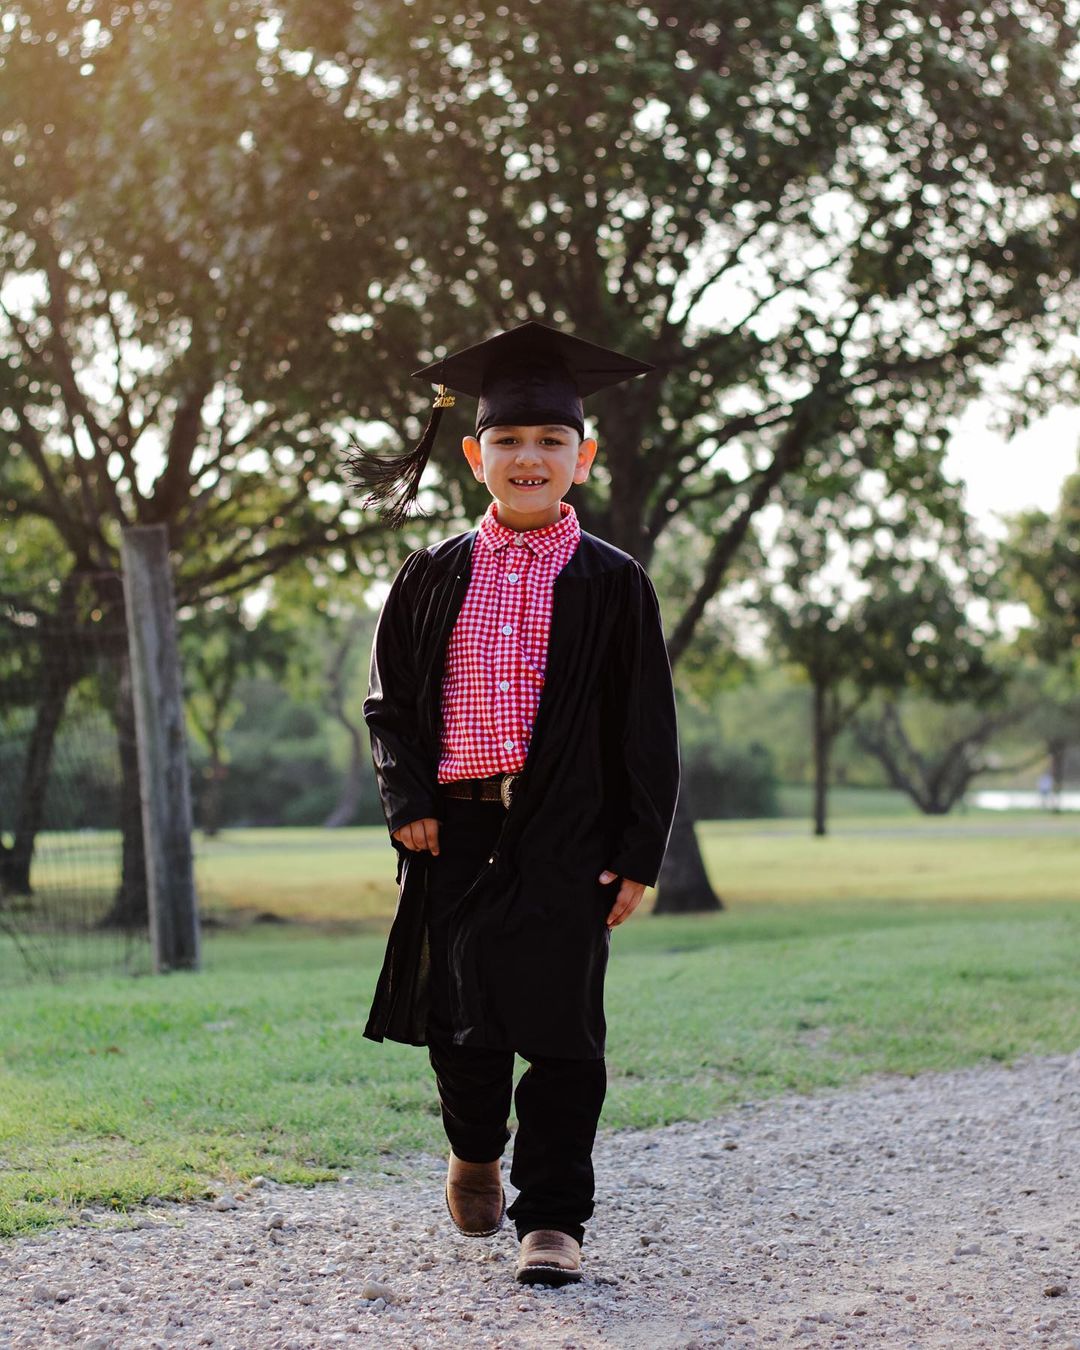 22 Best Graduation Outfits for Boys 2023